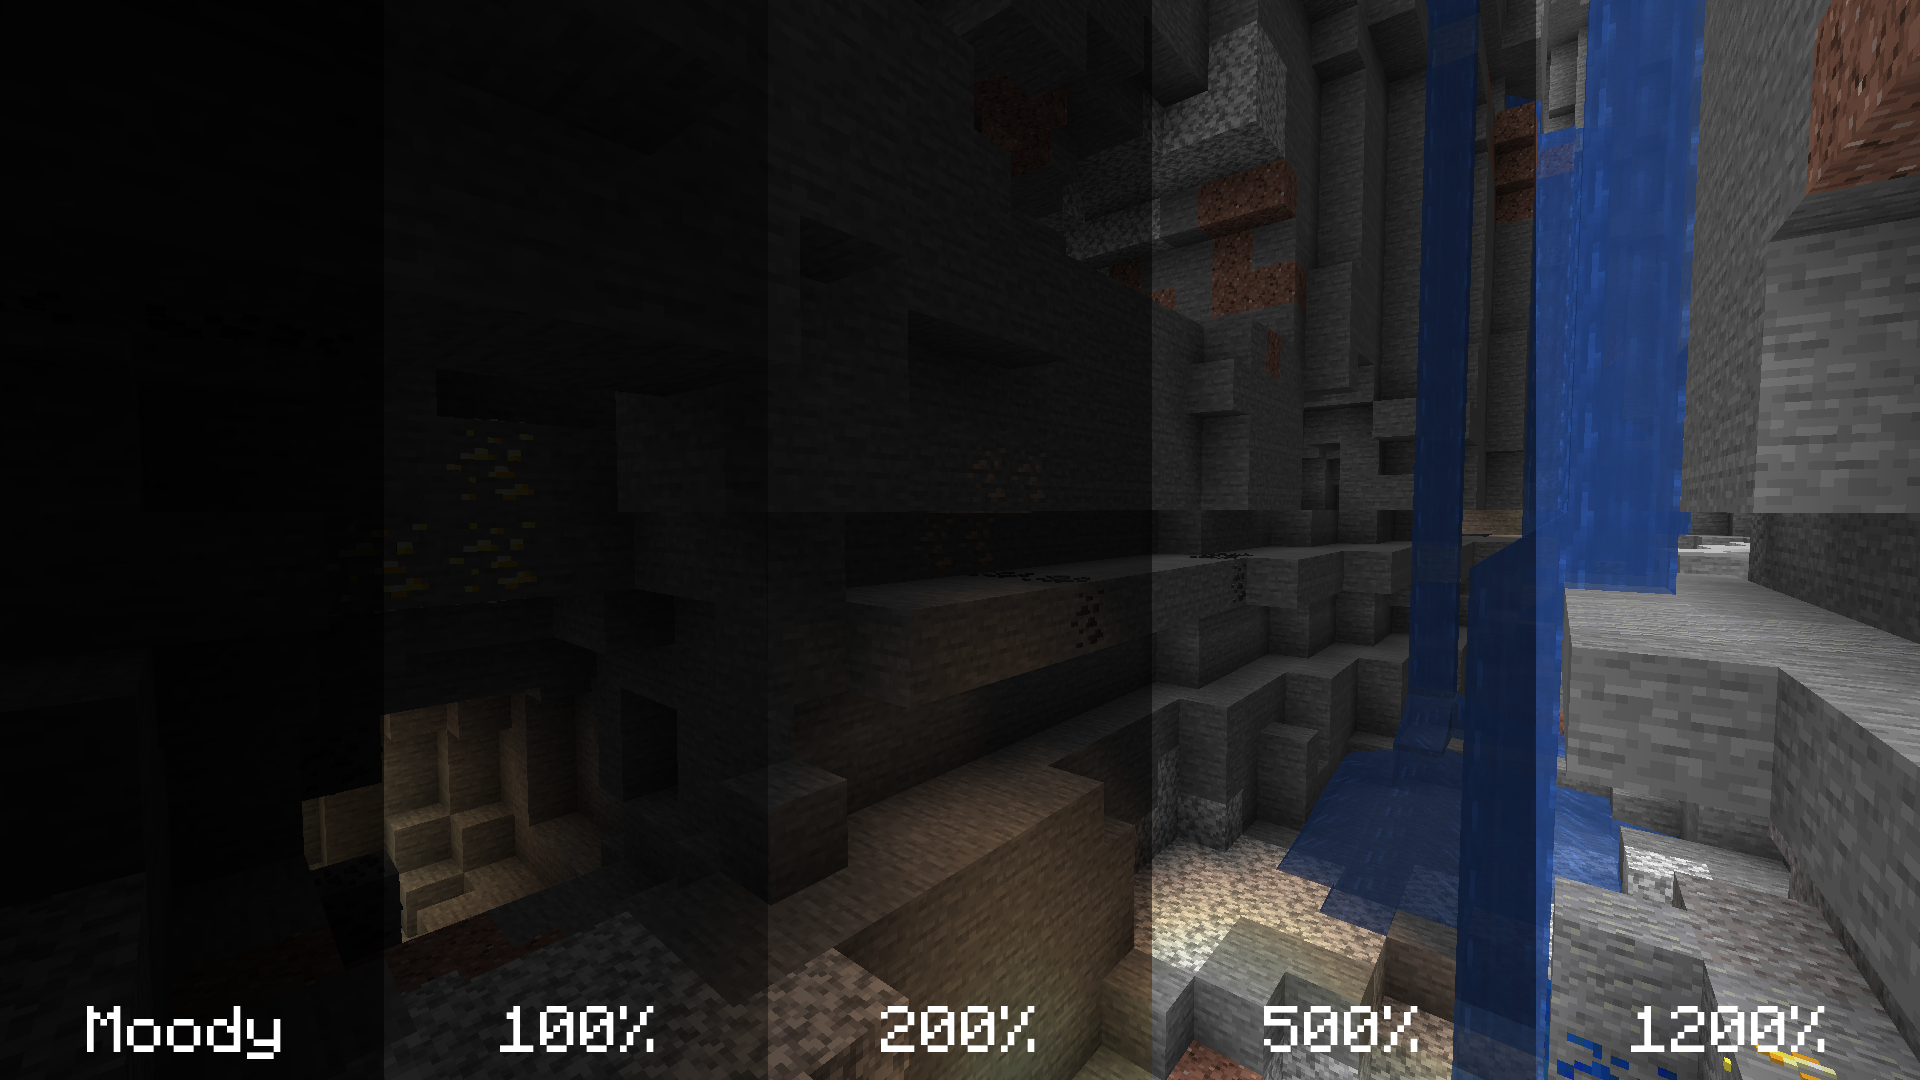 Comparison of several brightness levels in a cave